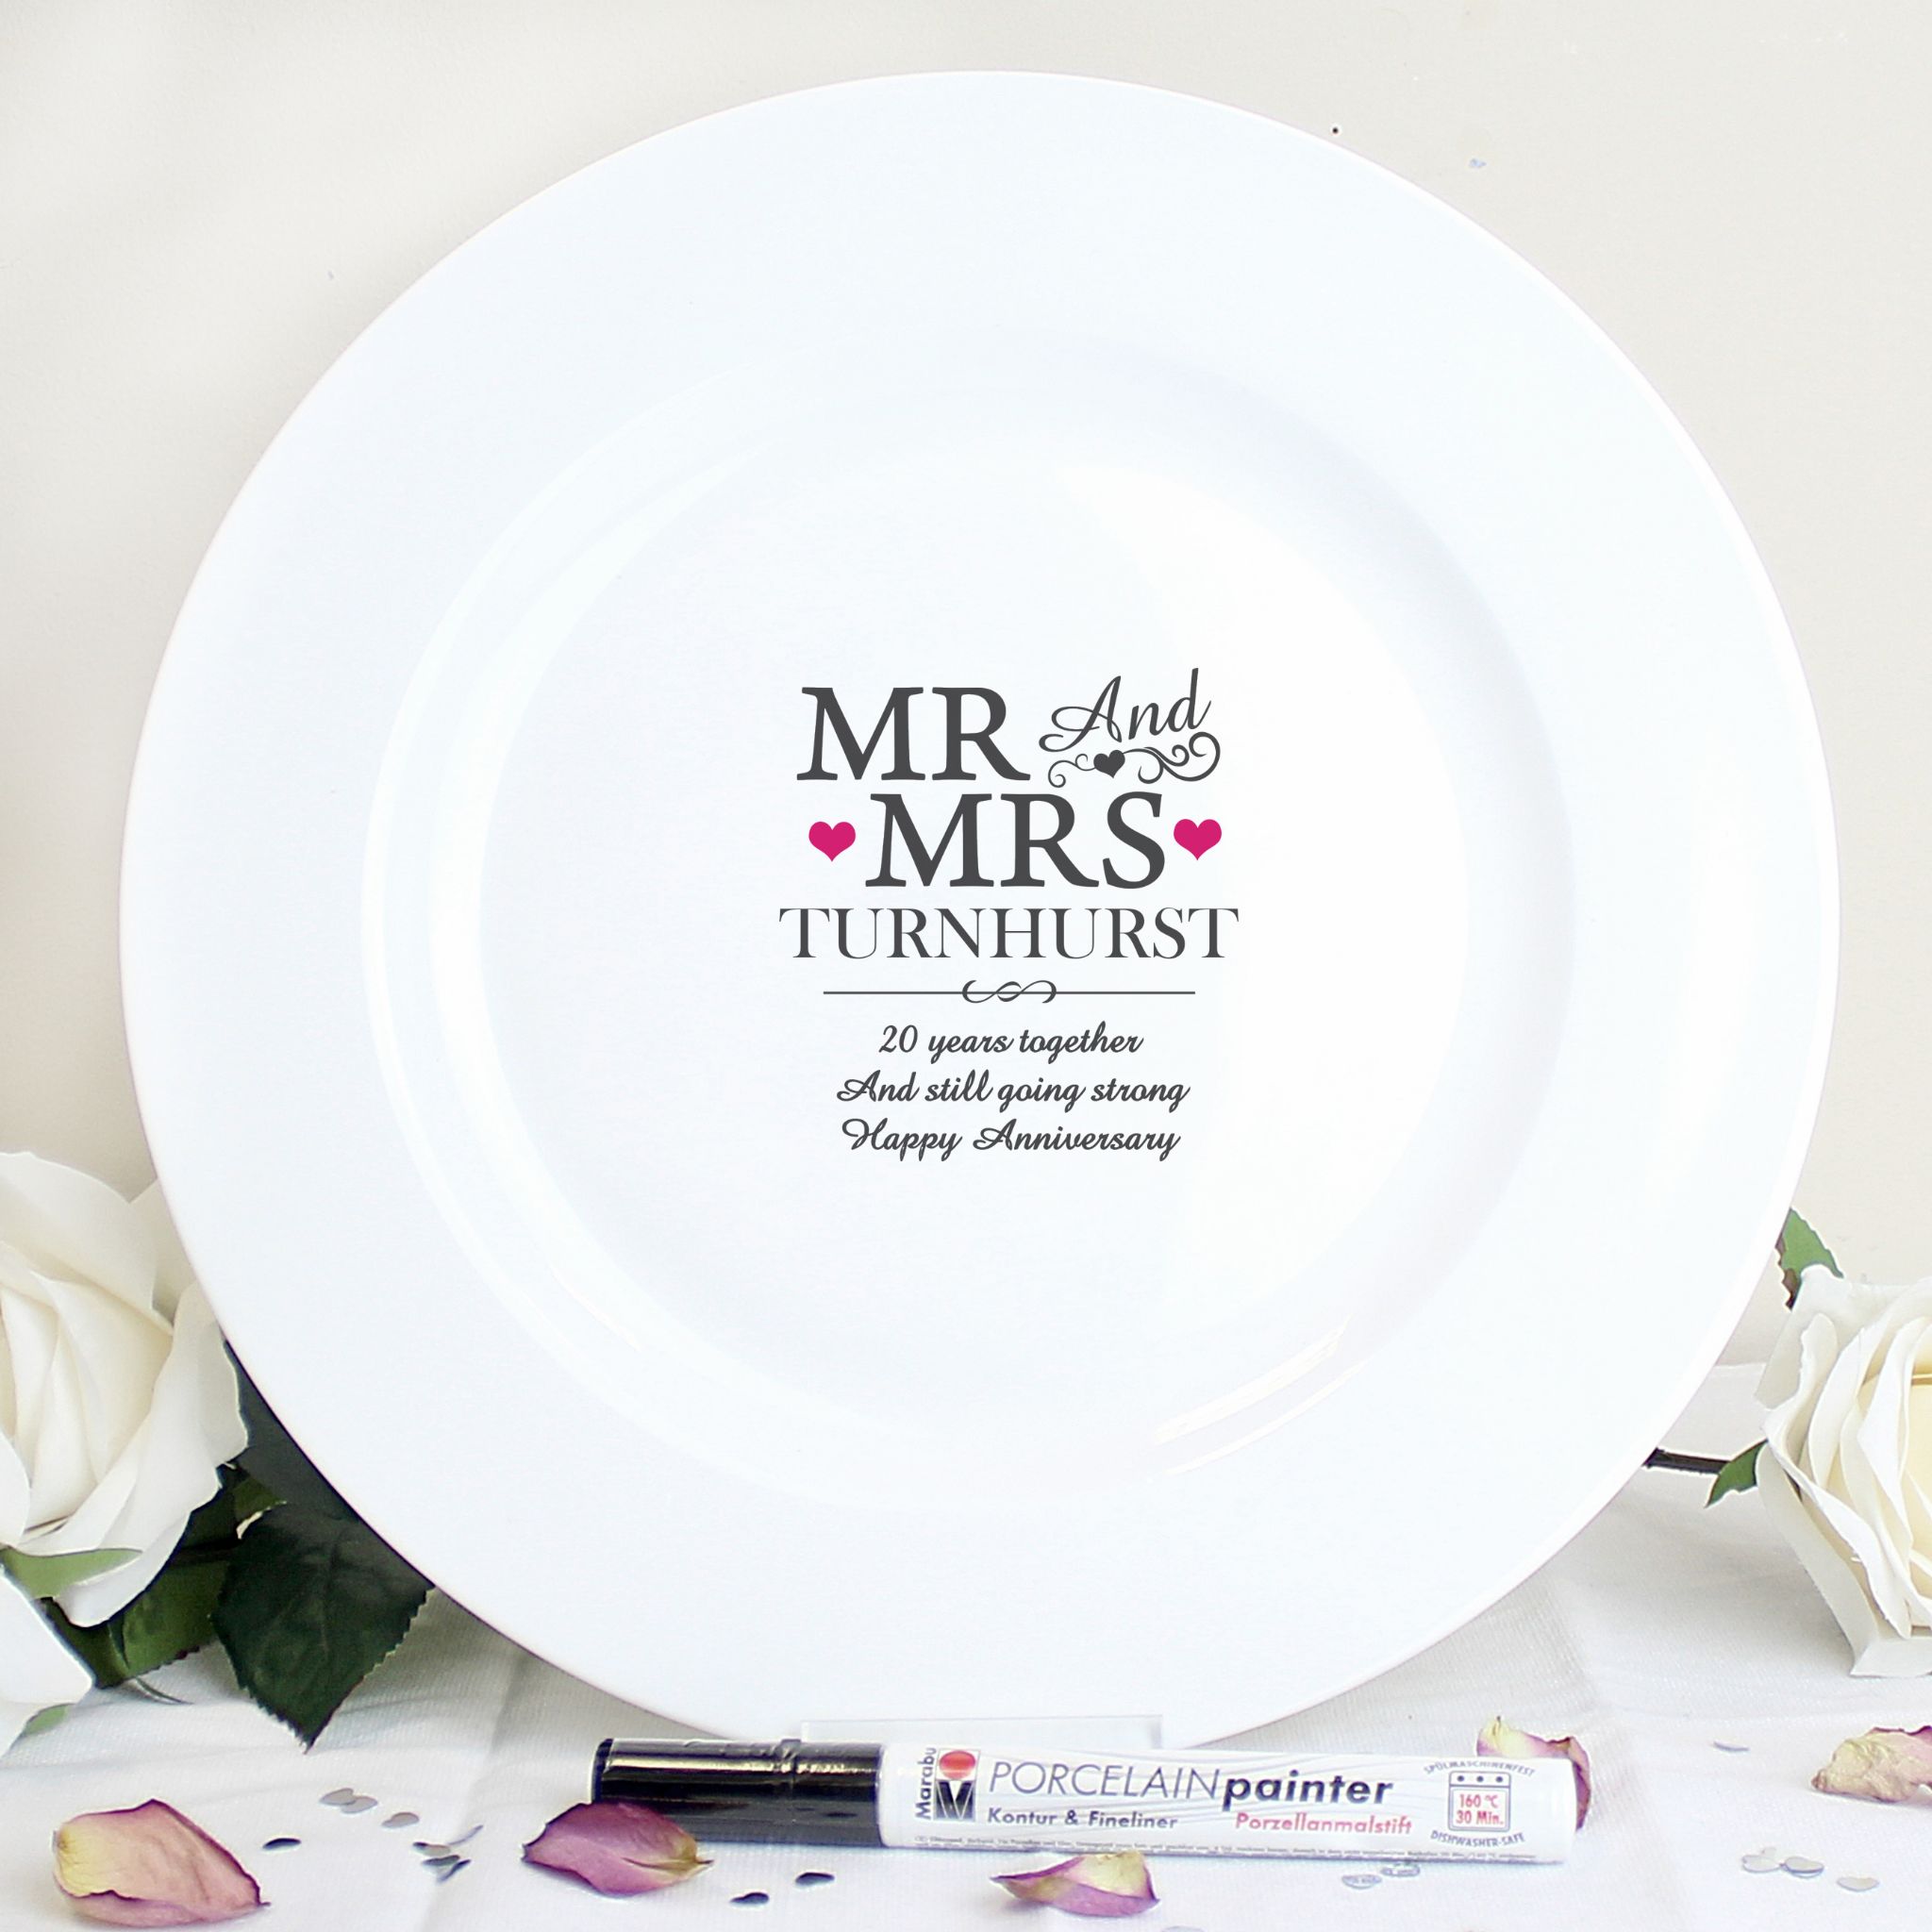 Mr and Mrs Message Plate with Personalisation Pen for Family and Friends to Sign